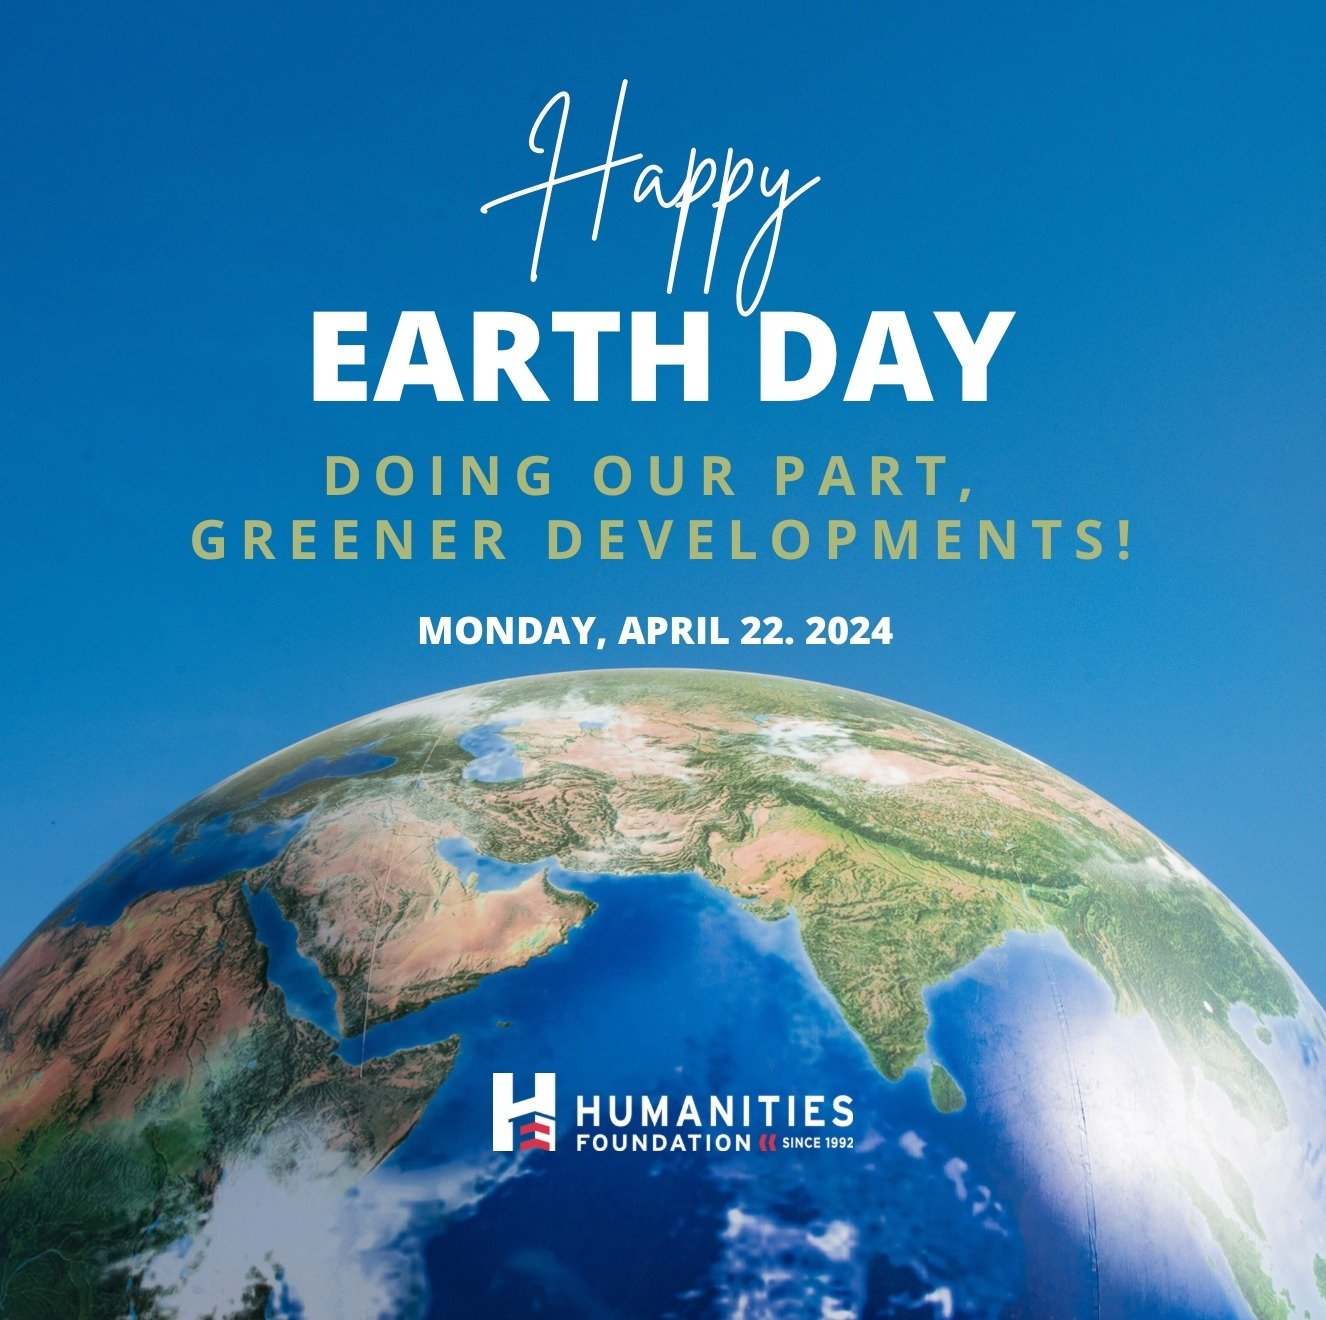 🌍 Developing communities that honor our planet 🌱 We are proud that many of our developments have the distinction of being EarthCraft Certified, LEED Certified, and/or designated as a Green Community. Happy Earth Day from Humanities Foundation! 🌍🌿